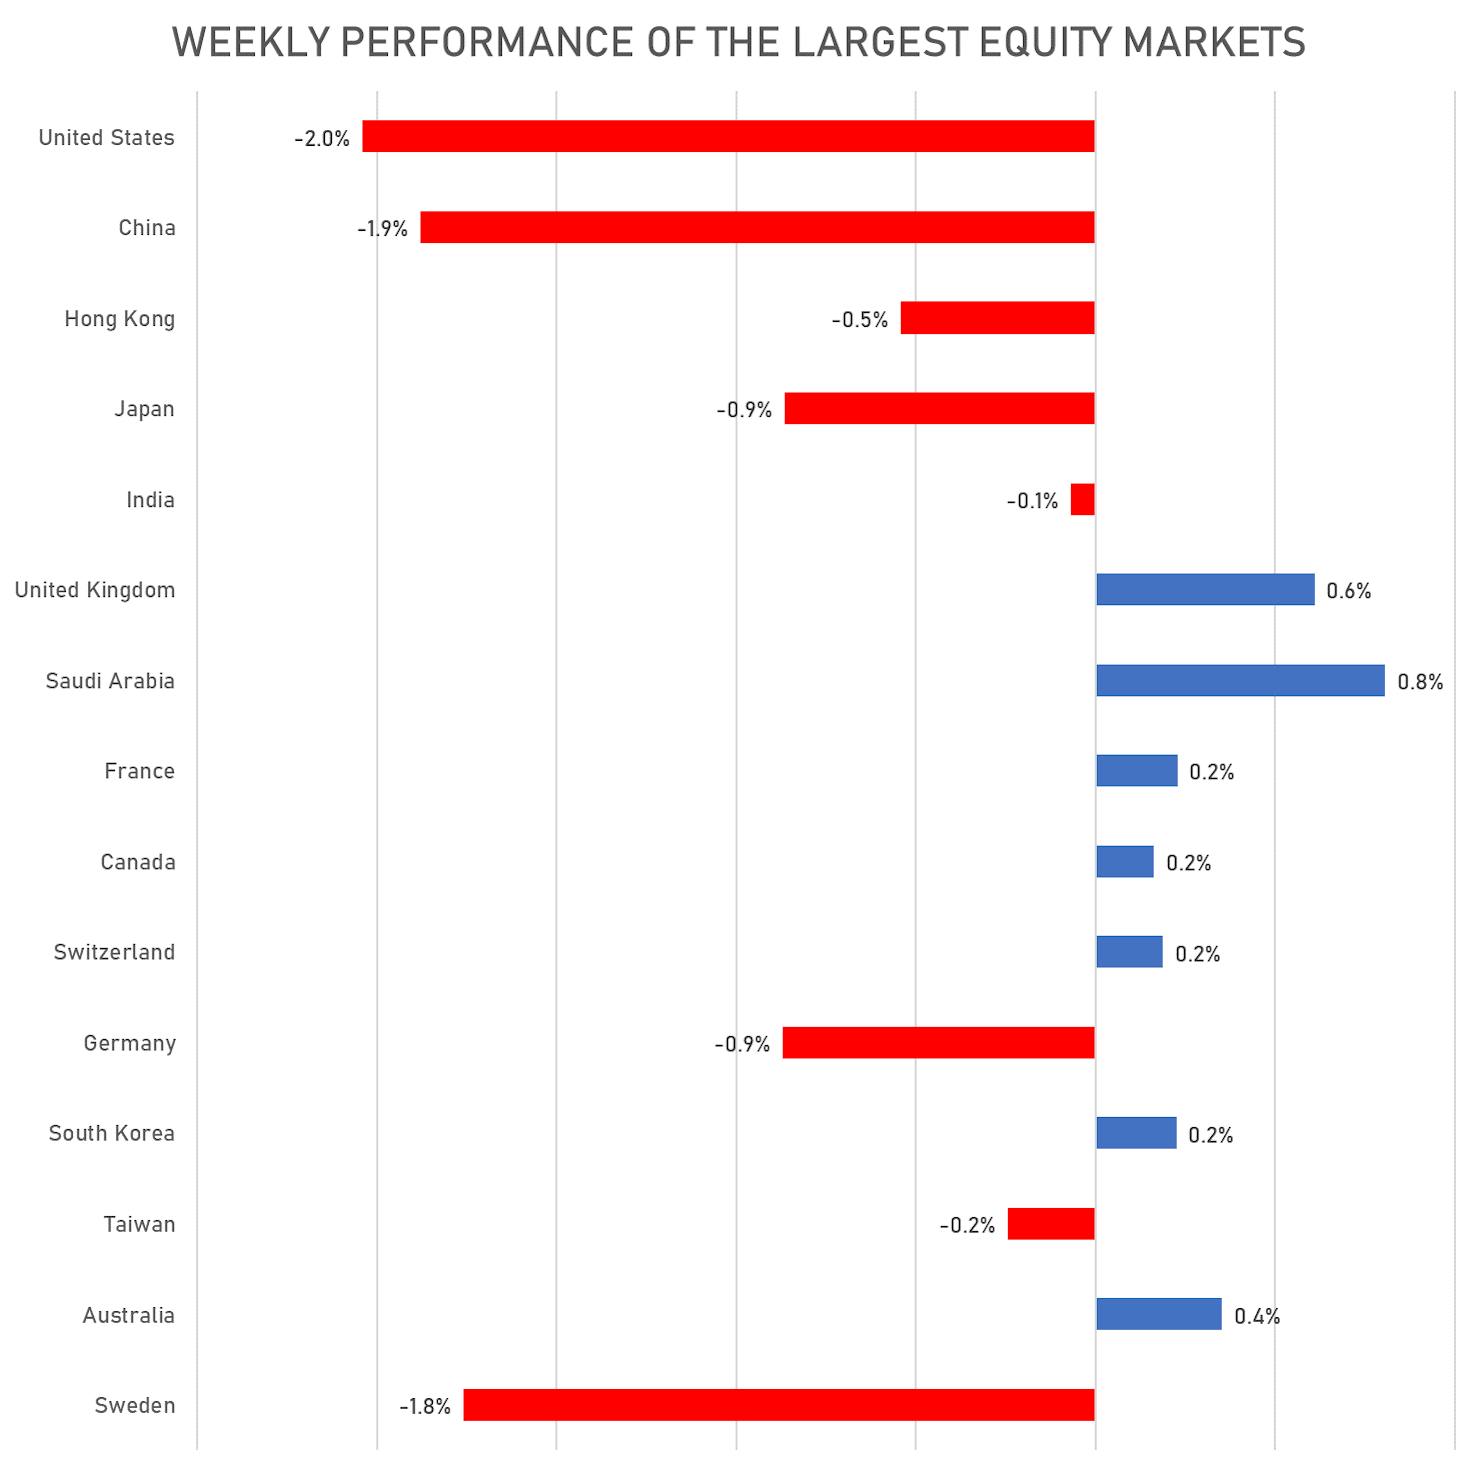 Weekly performance of the largest equity markets | Sources: phipost.com, FactSet data